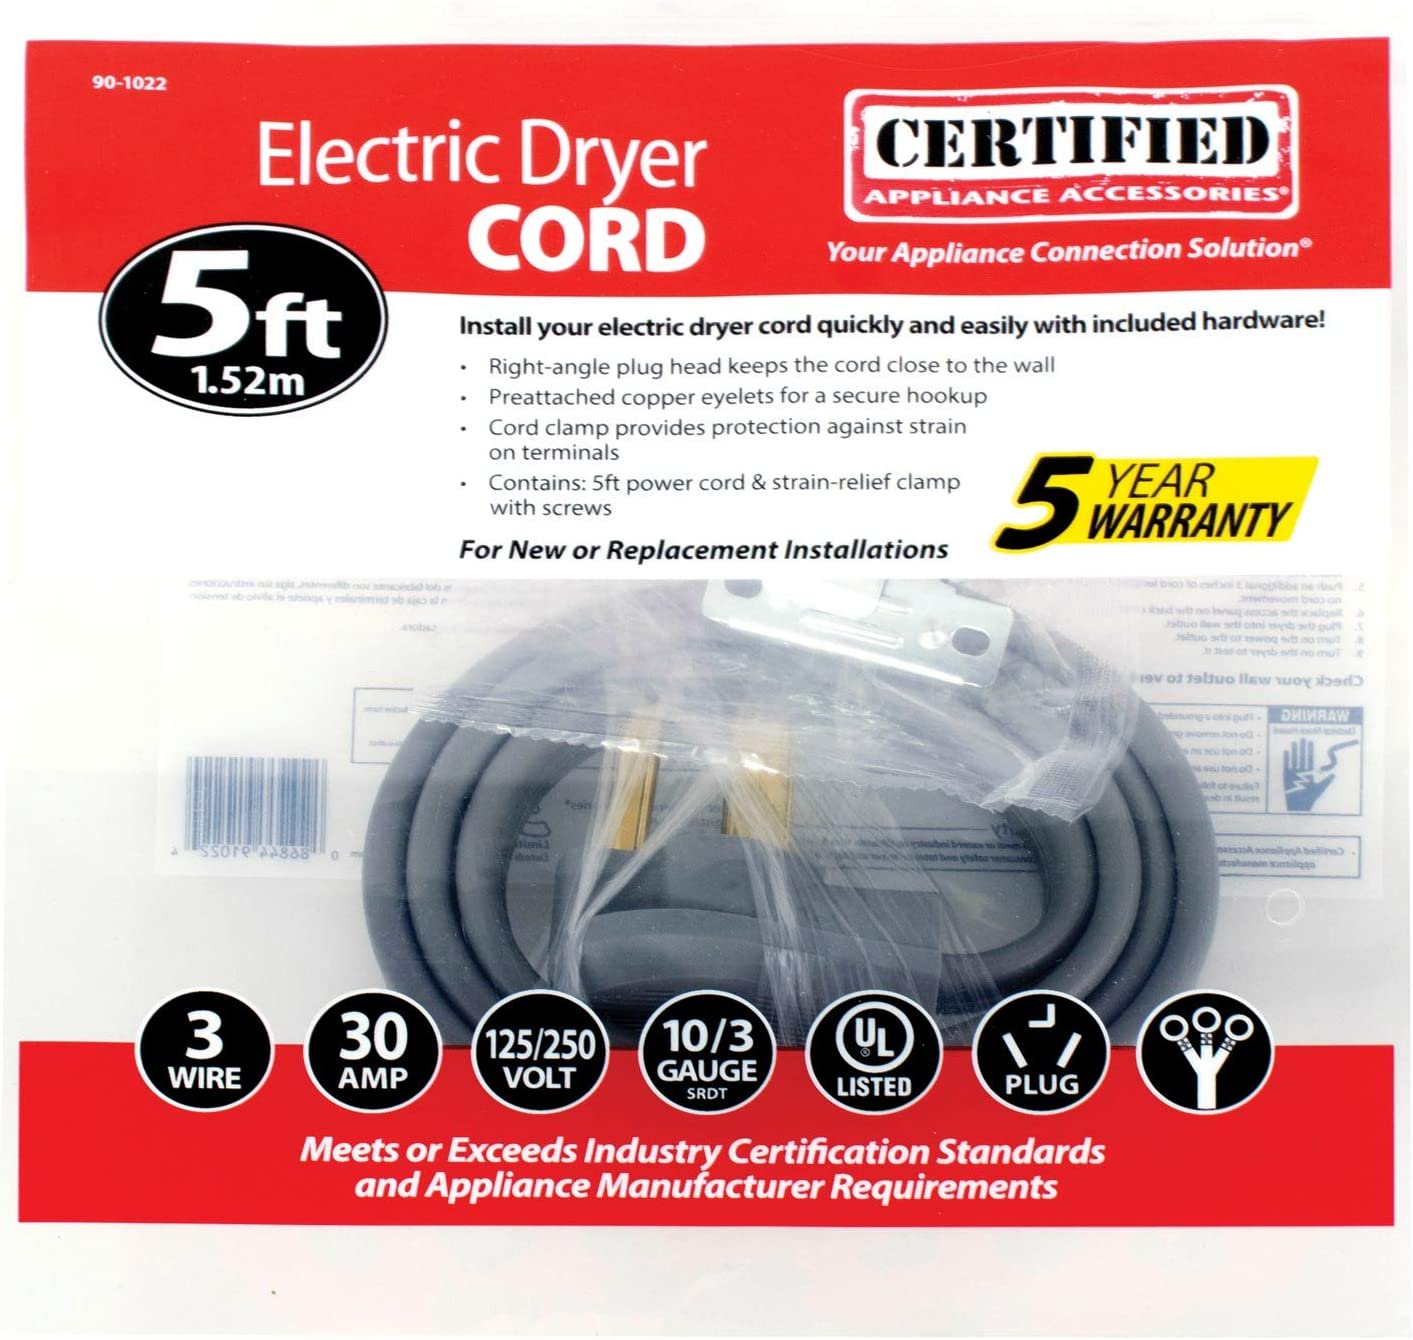 Certified Appliance Accessories 30-Amp Appliance Power Cord, 3 Prong Dryer Cord, 3 Wires with Eyelet Connectors, 5 Feet, Copper Wire